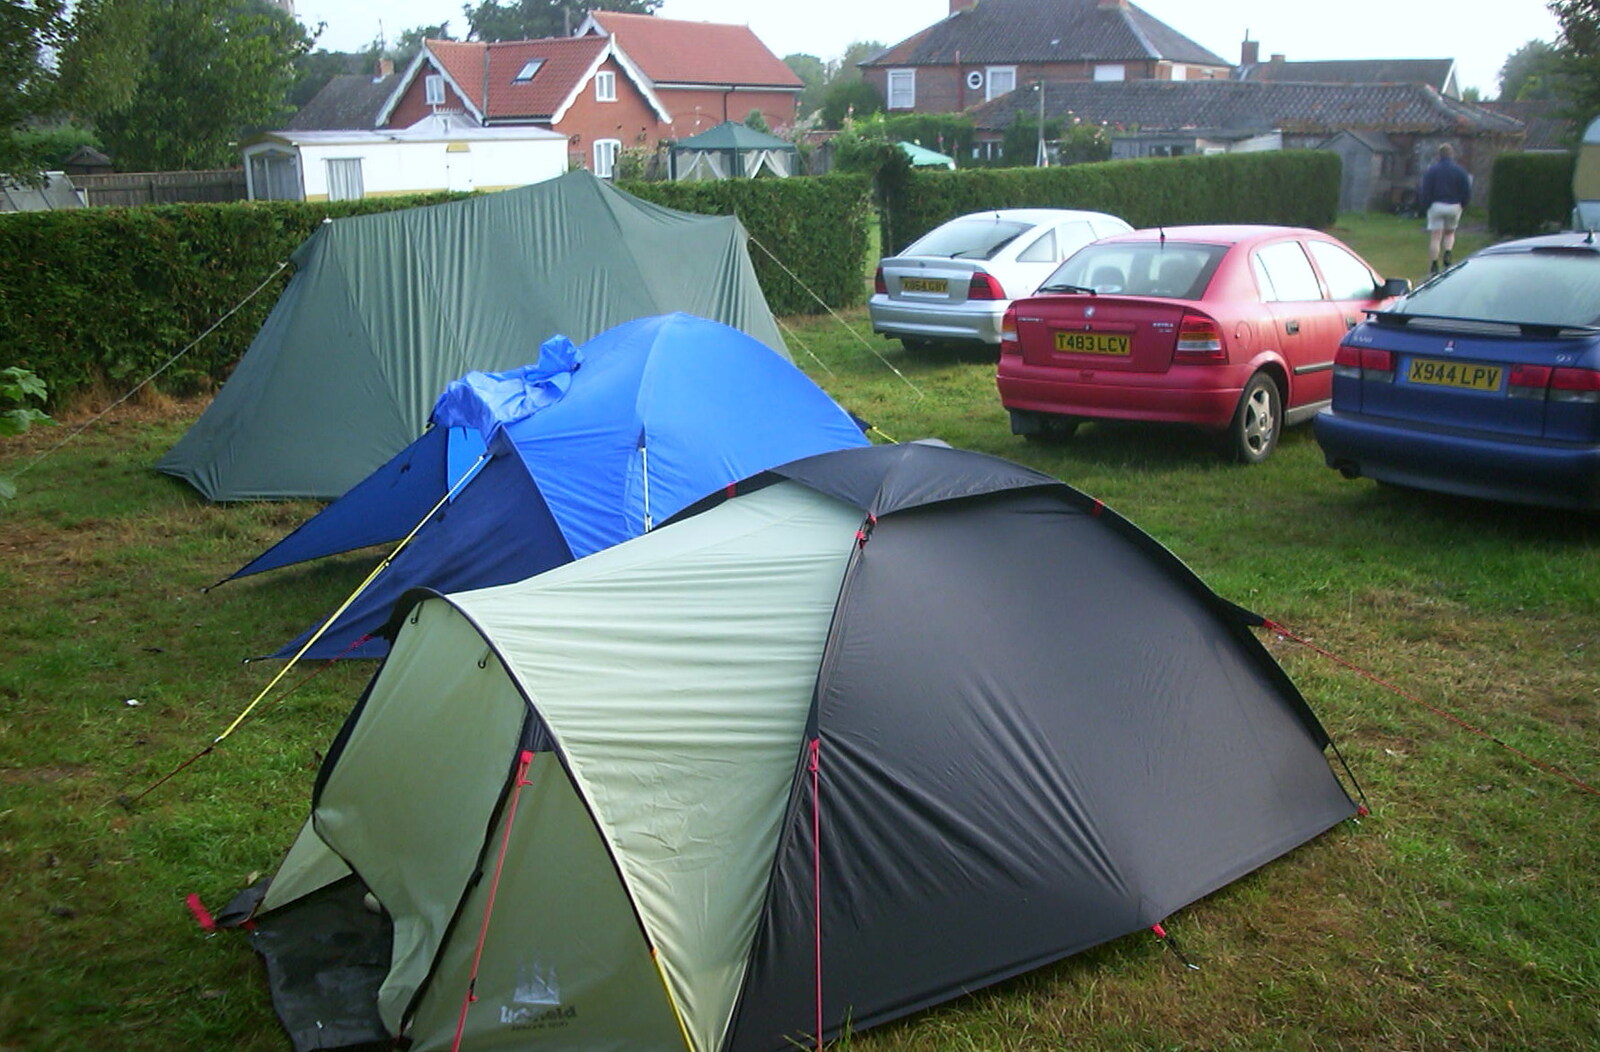 A BSCC Splinter Group Camping Weekend, Theberton, Suffolk - 11th August 2002: Tent City in the Lion's field